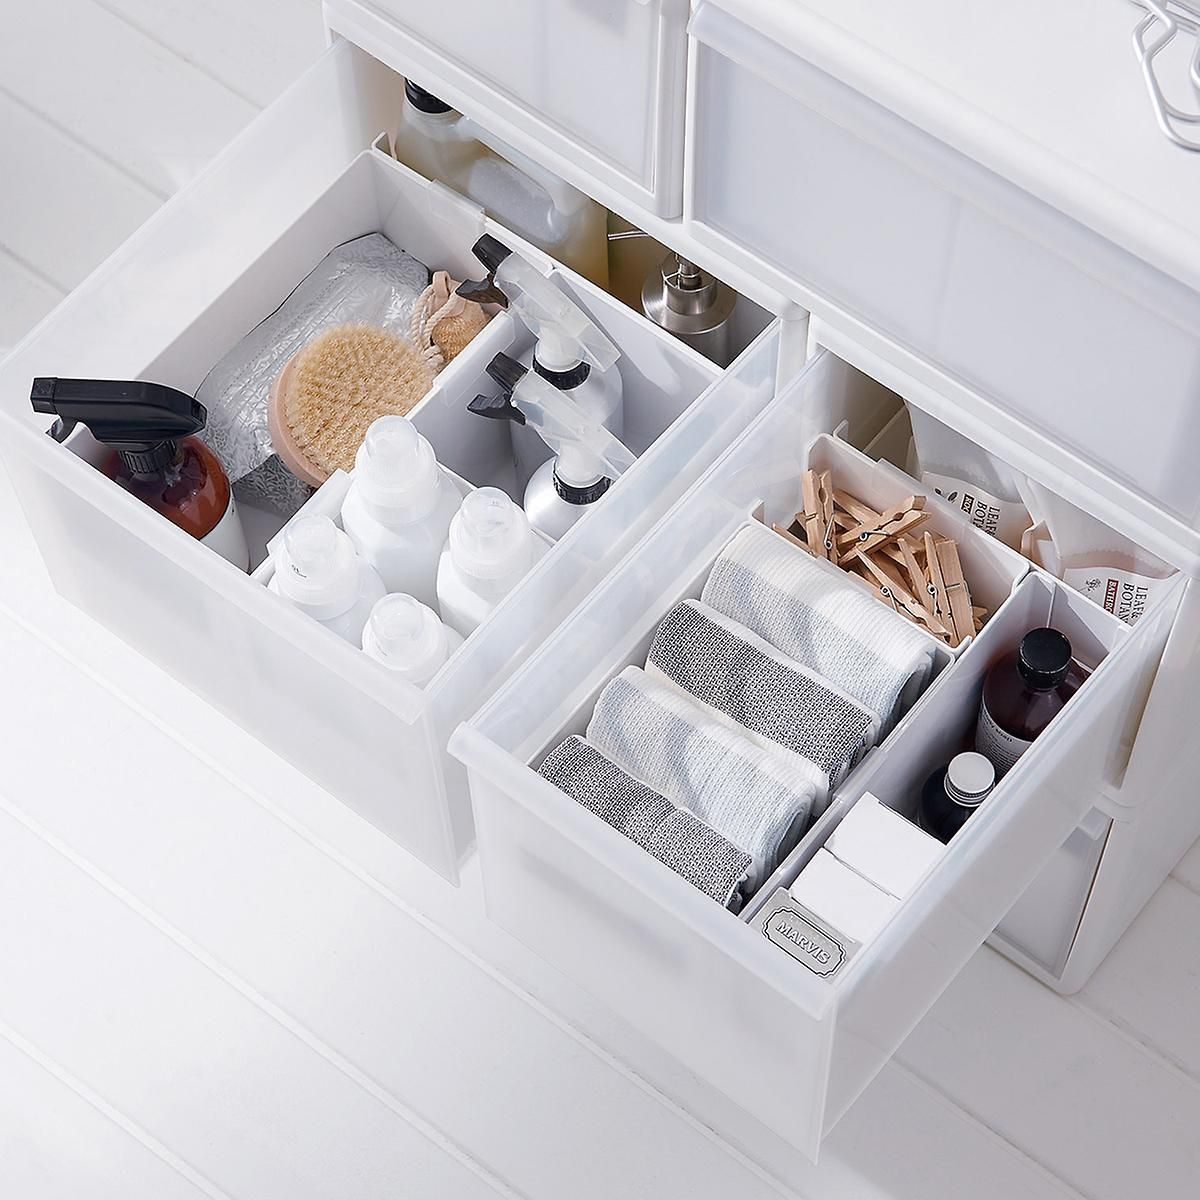 40 DIY Storage Solutions That Will Change Your Life